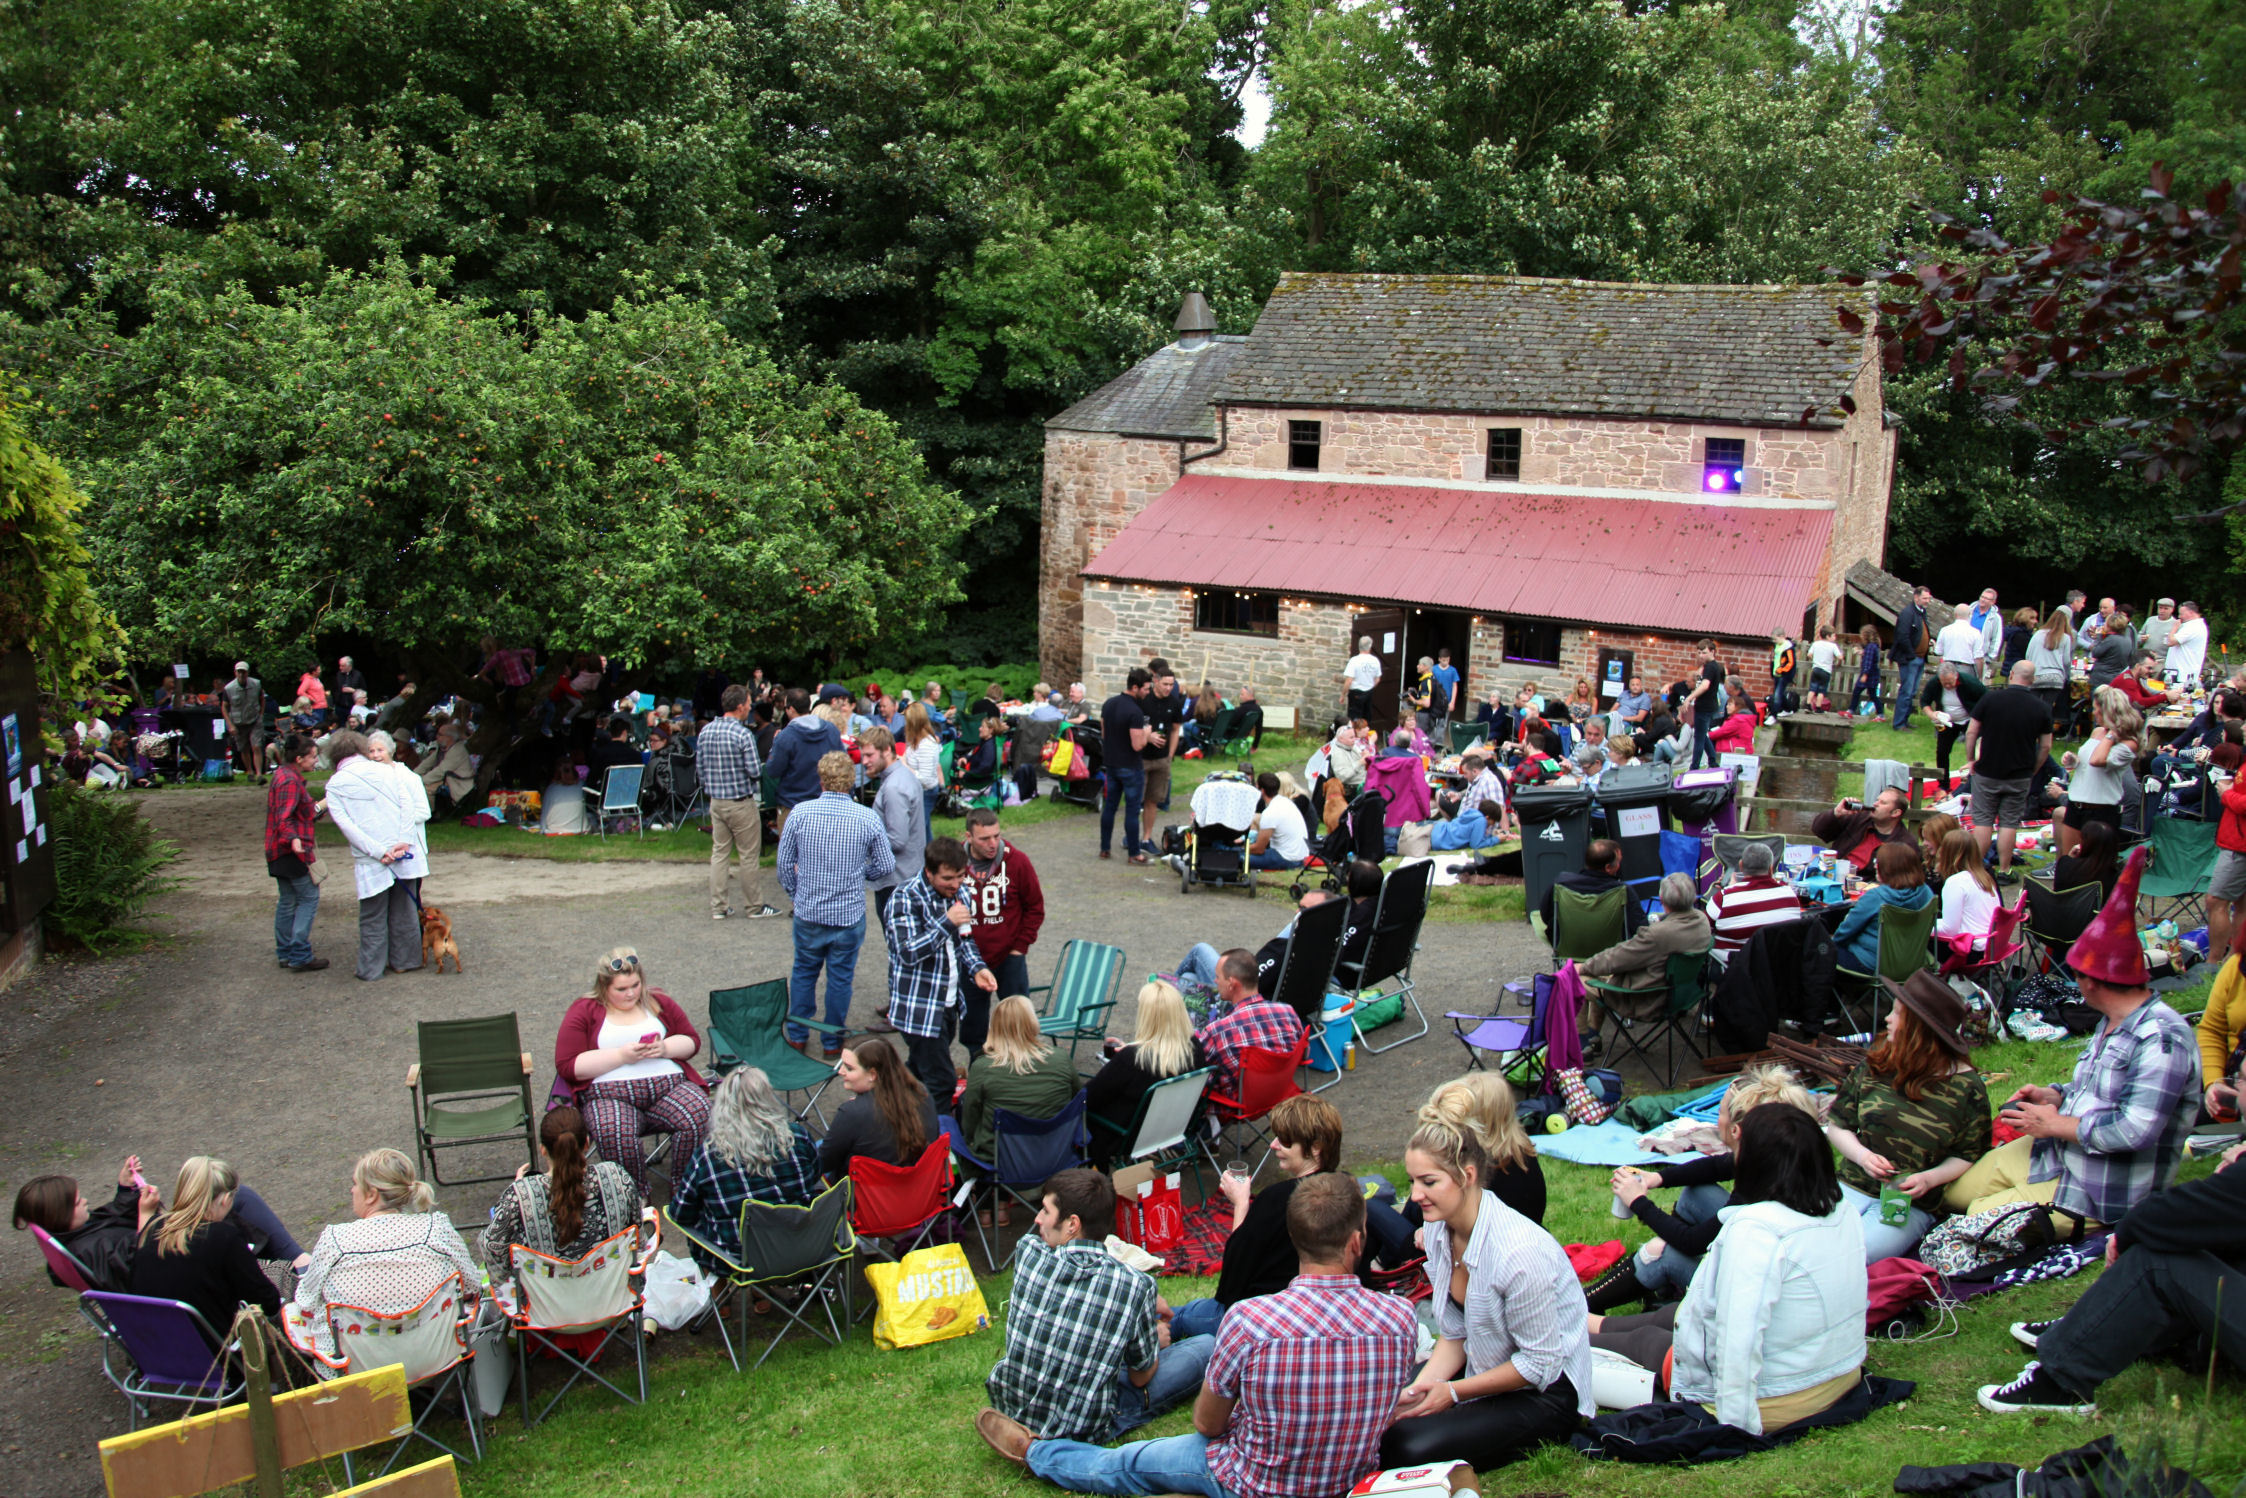 Crowds enjoy the entertainment at a previous Music at the Mill event